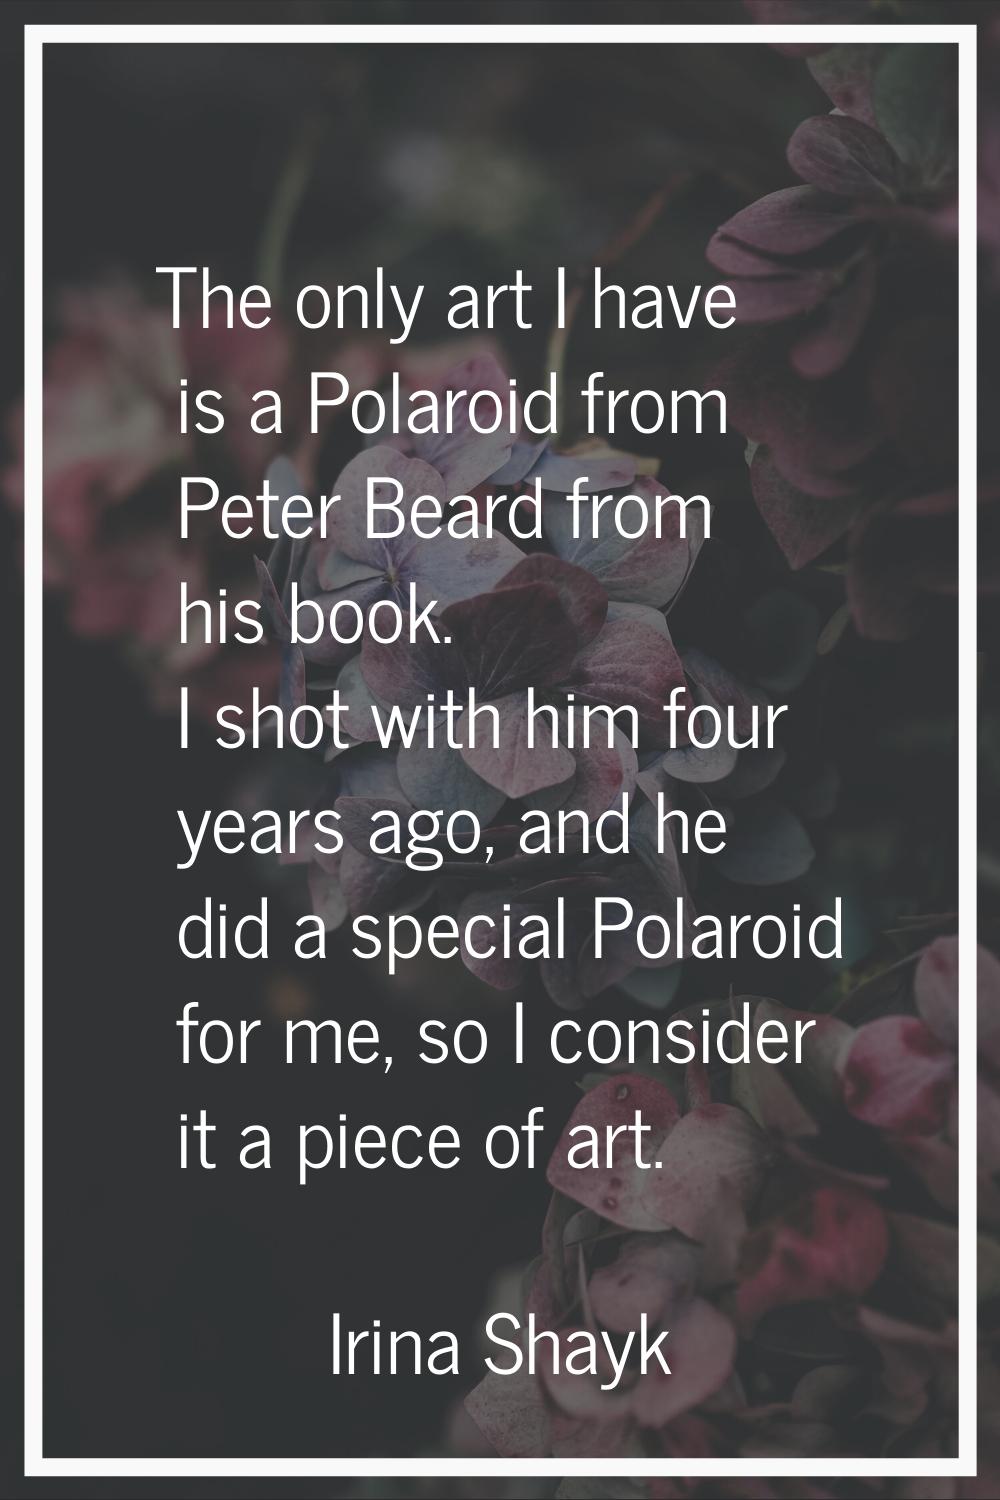 The only art I have is a Polaroid from Peter Beard from his book. I shot with him four years ago, a